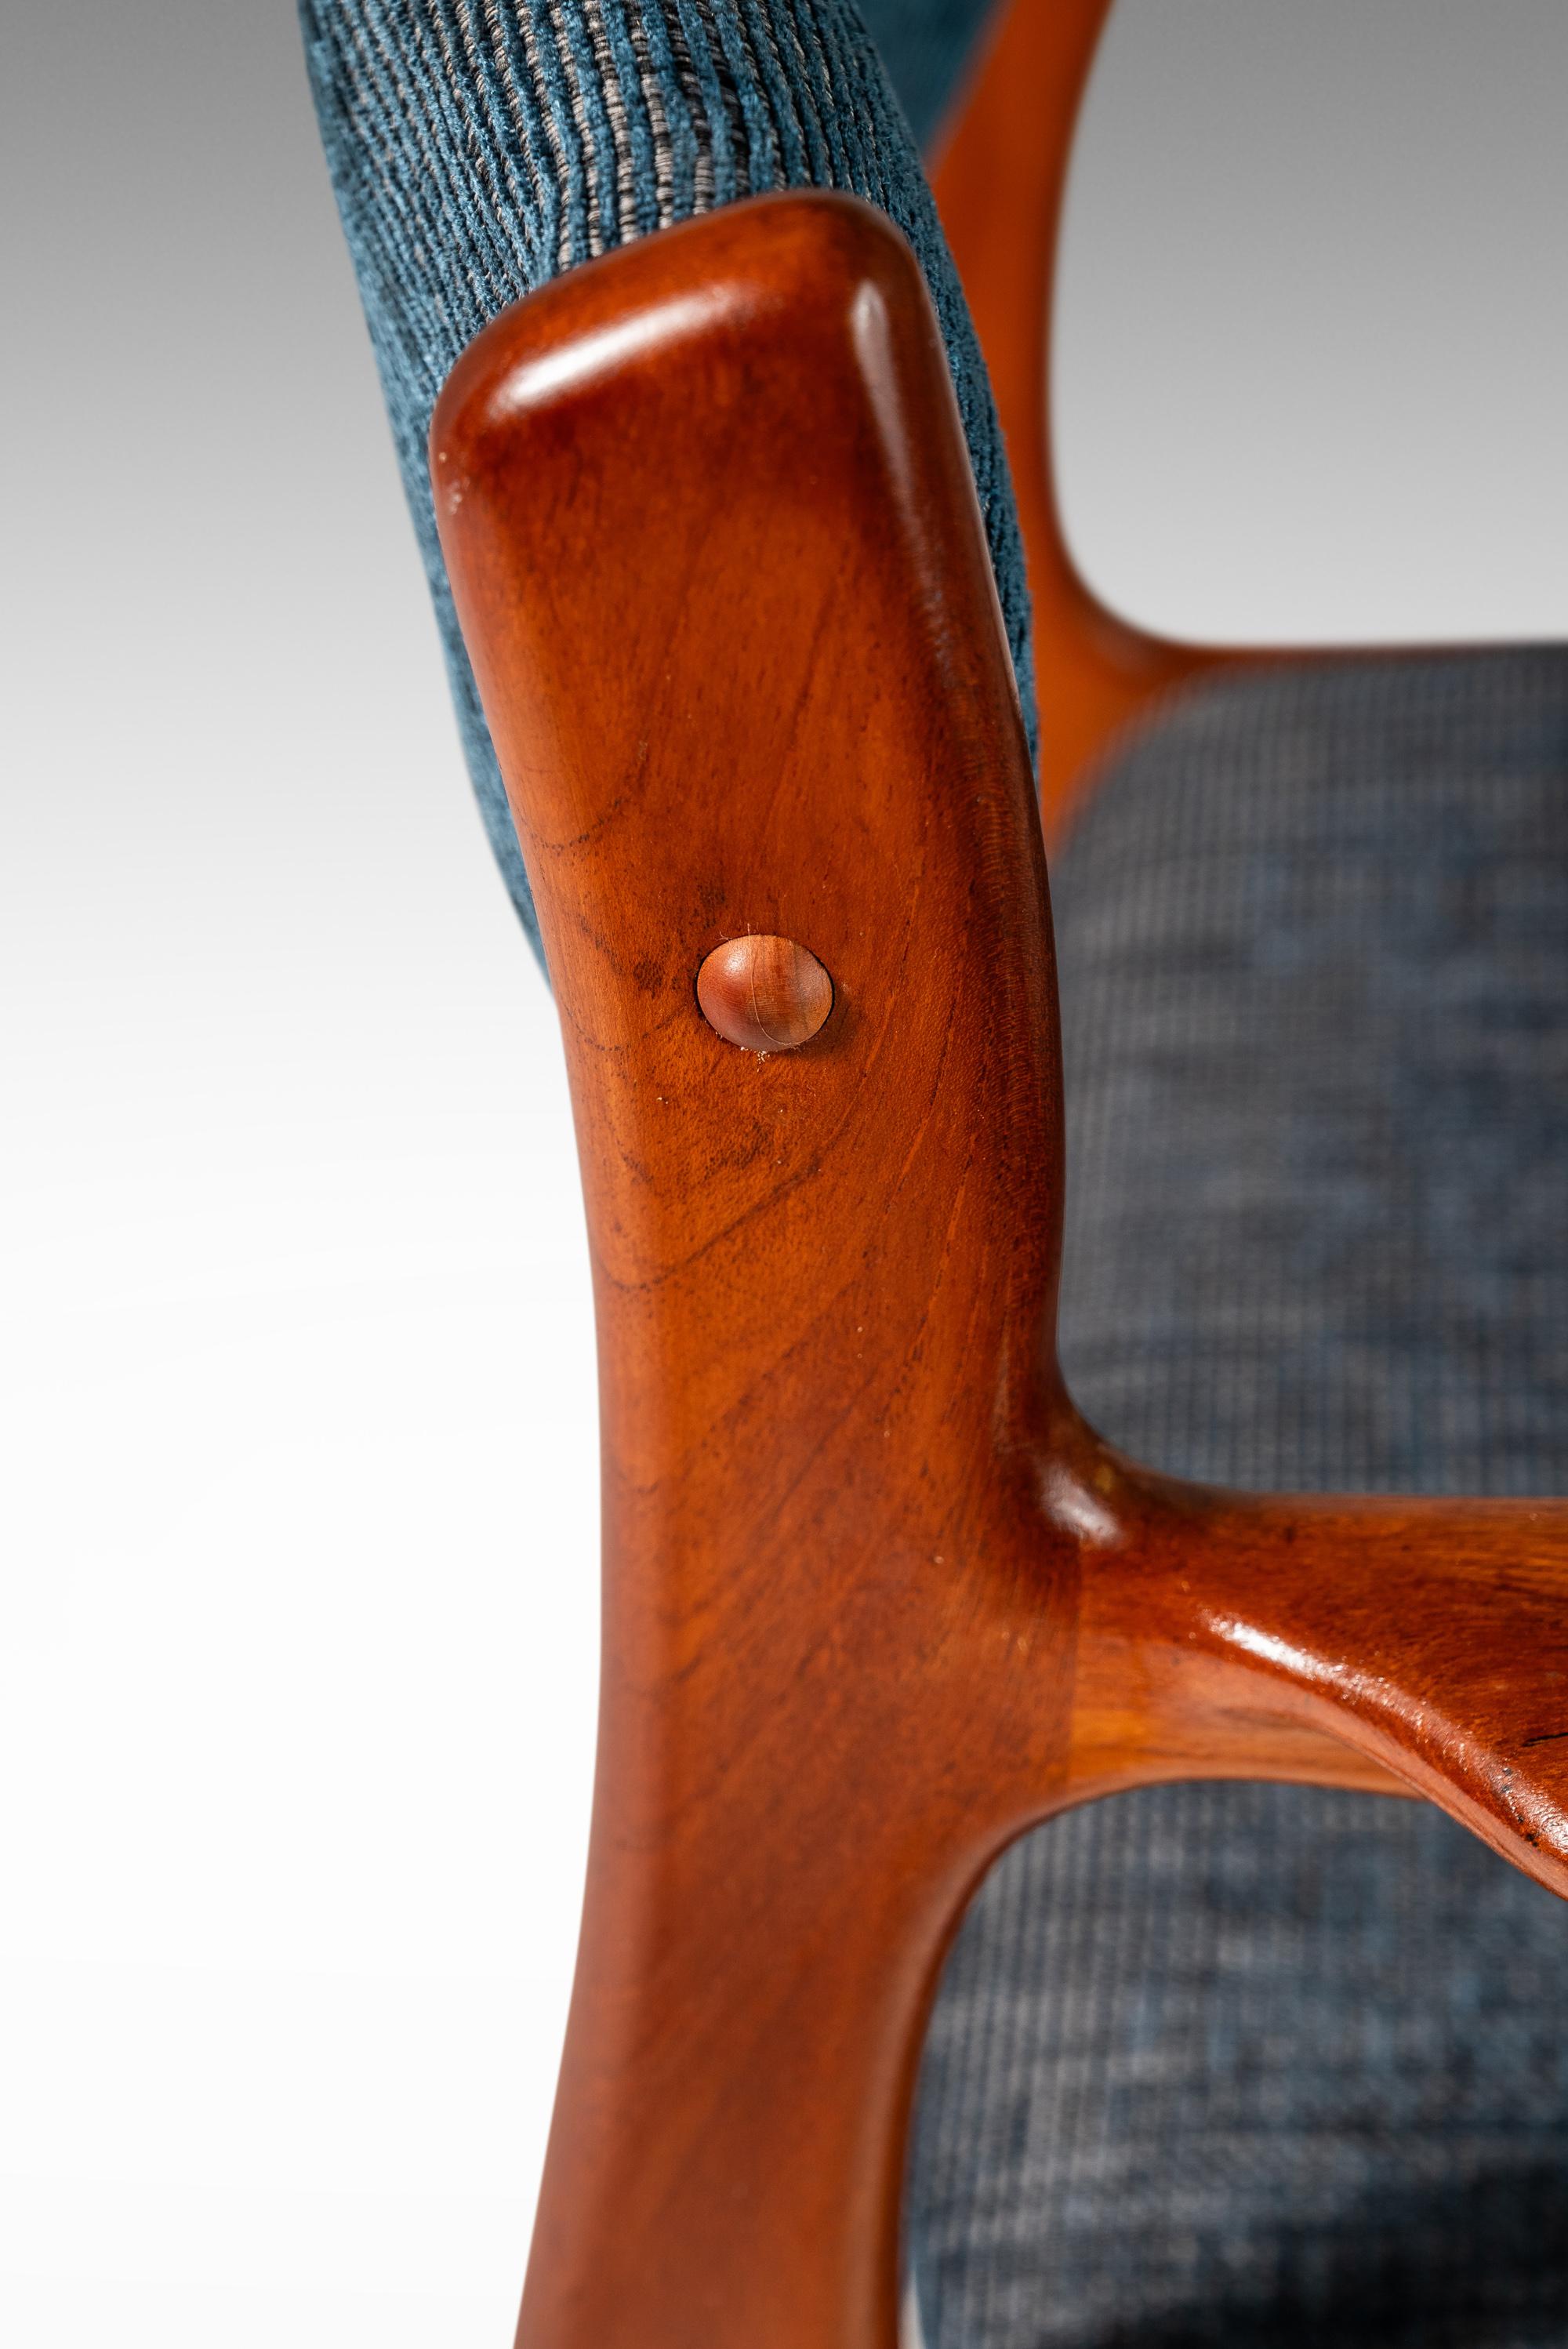 Fabric Arm Chair in Solid Teak and New Upholstery by Benny Linden Designs, c. 1970s For Sale